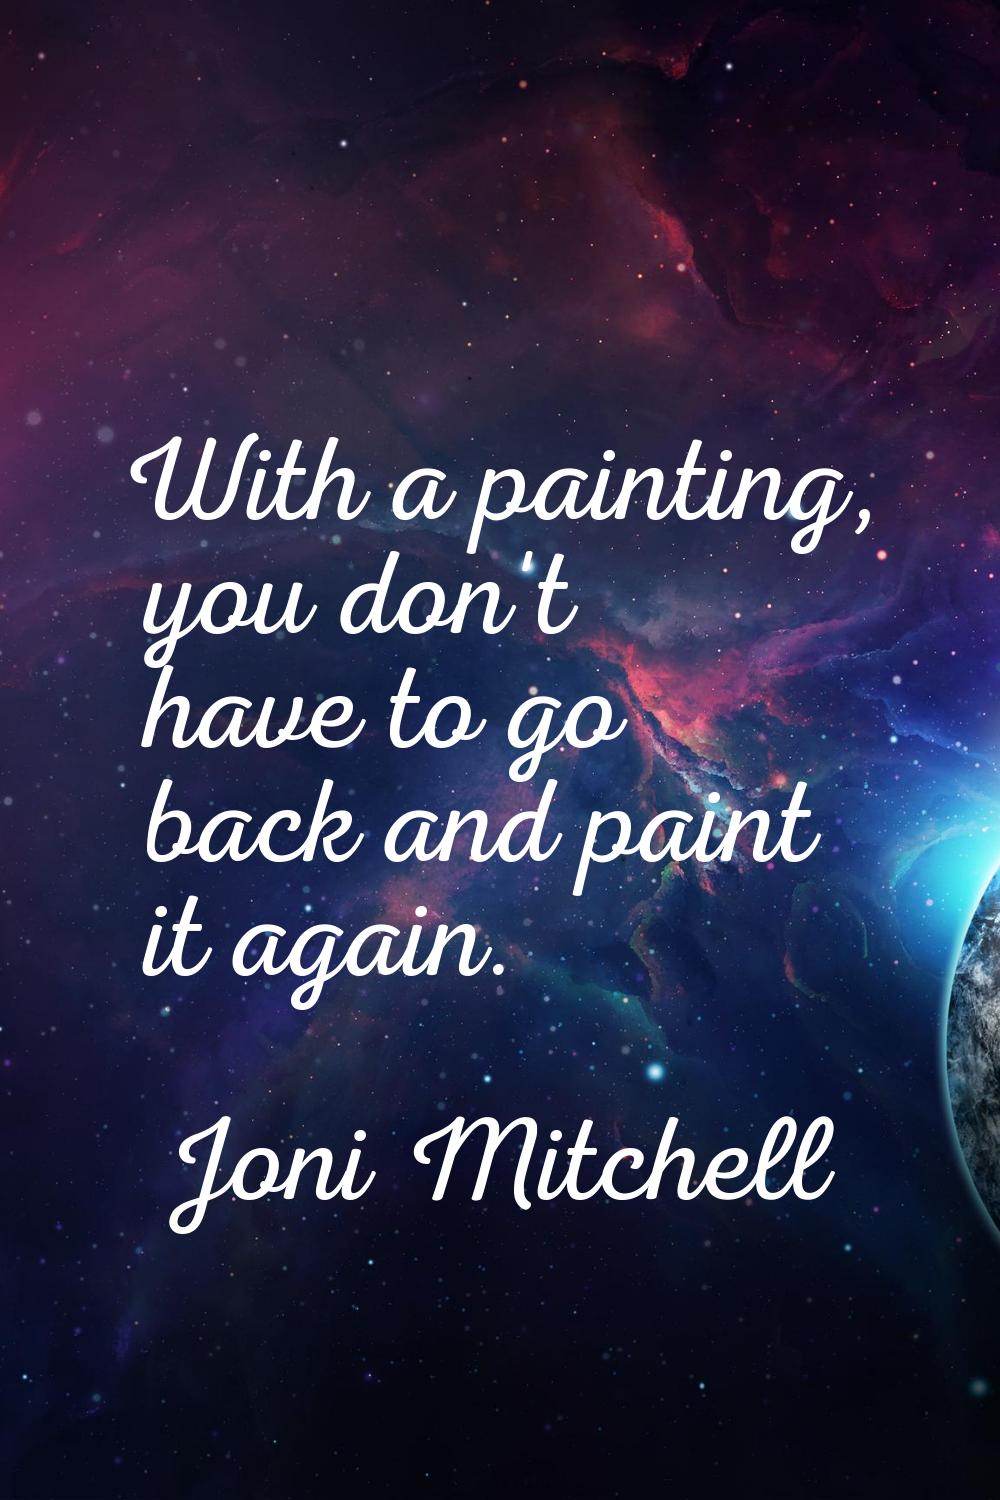 With a painting, you don't have to go back and paint it again.